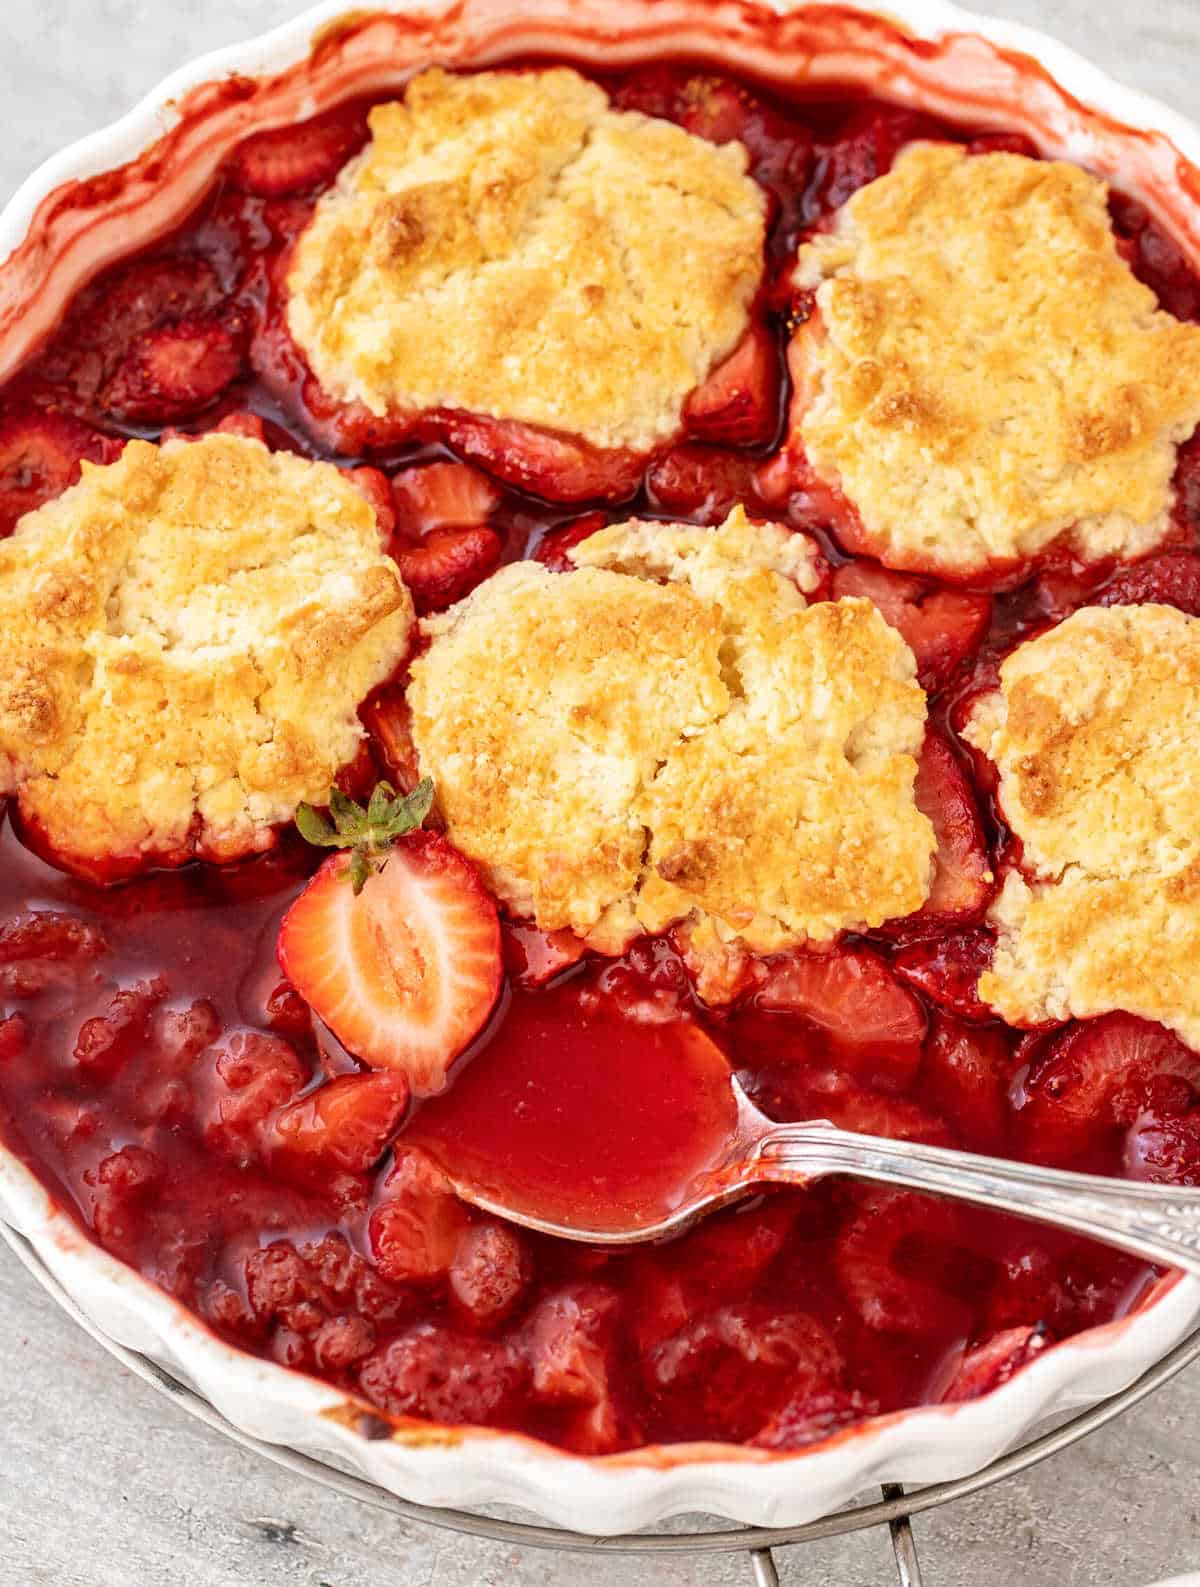 Partial view of round white dish with baked strawberry cobbler on grey surface.